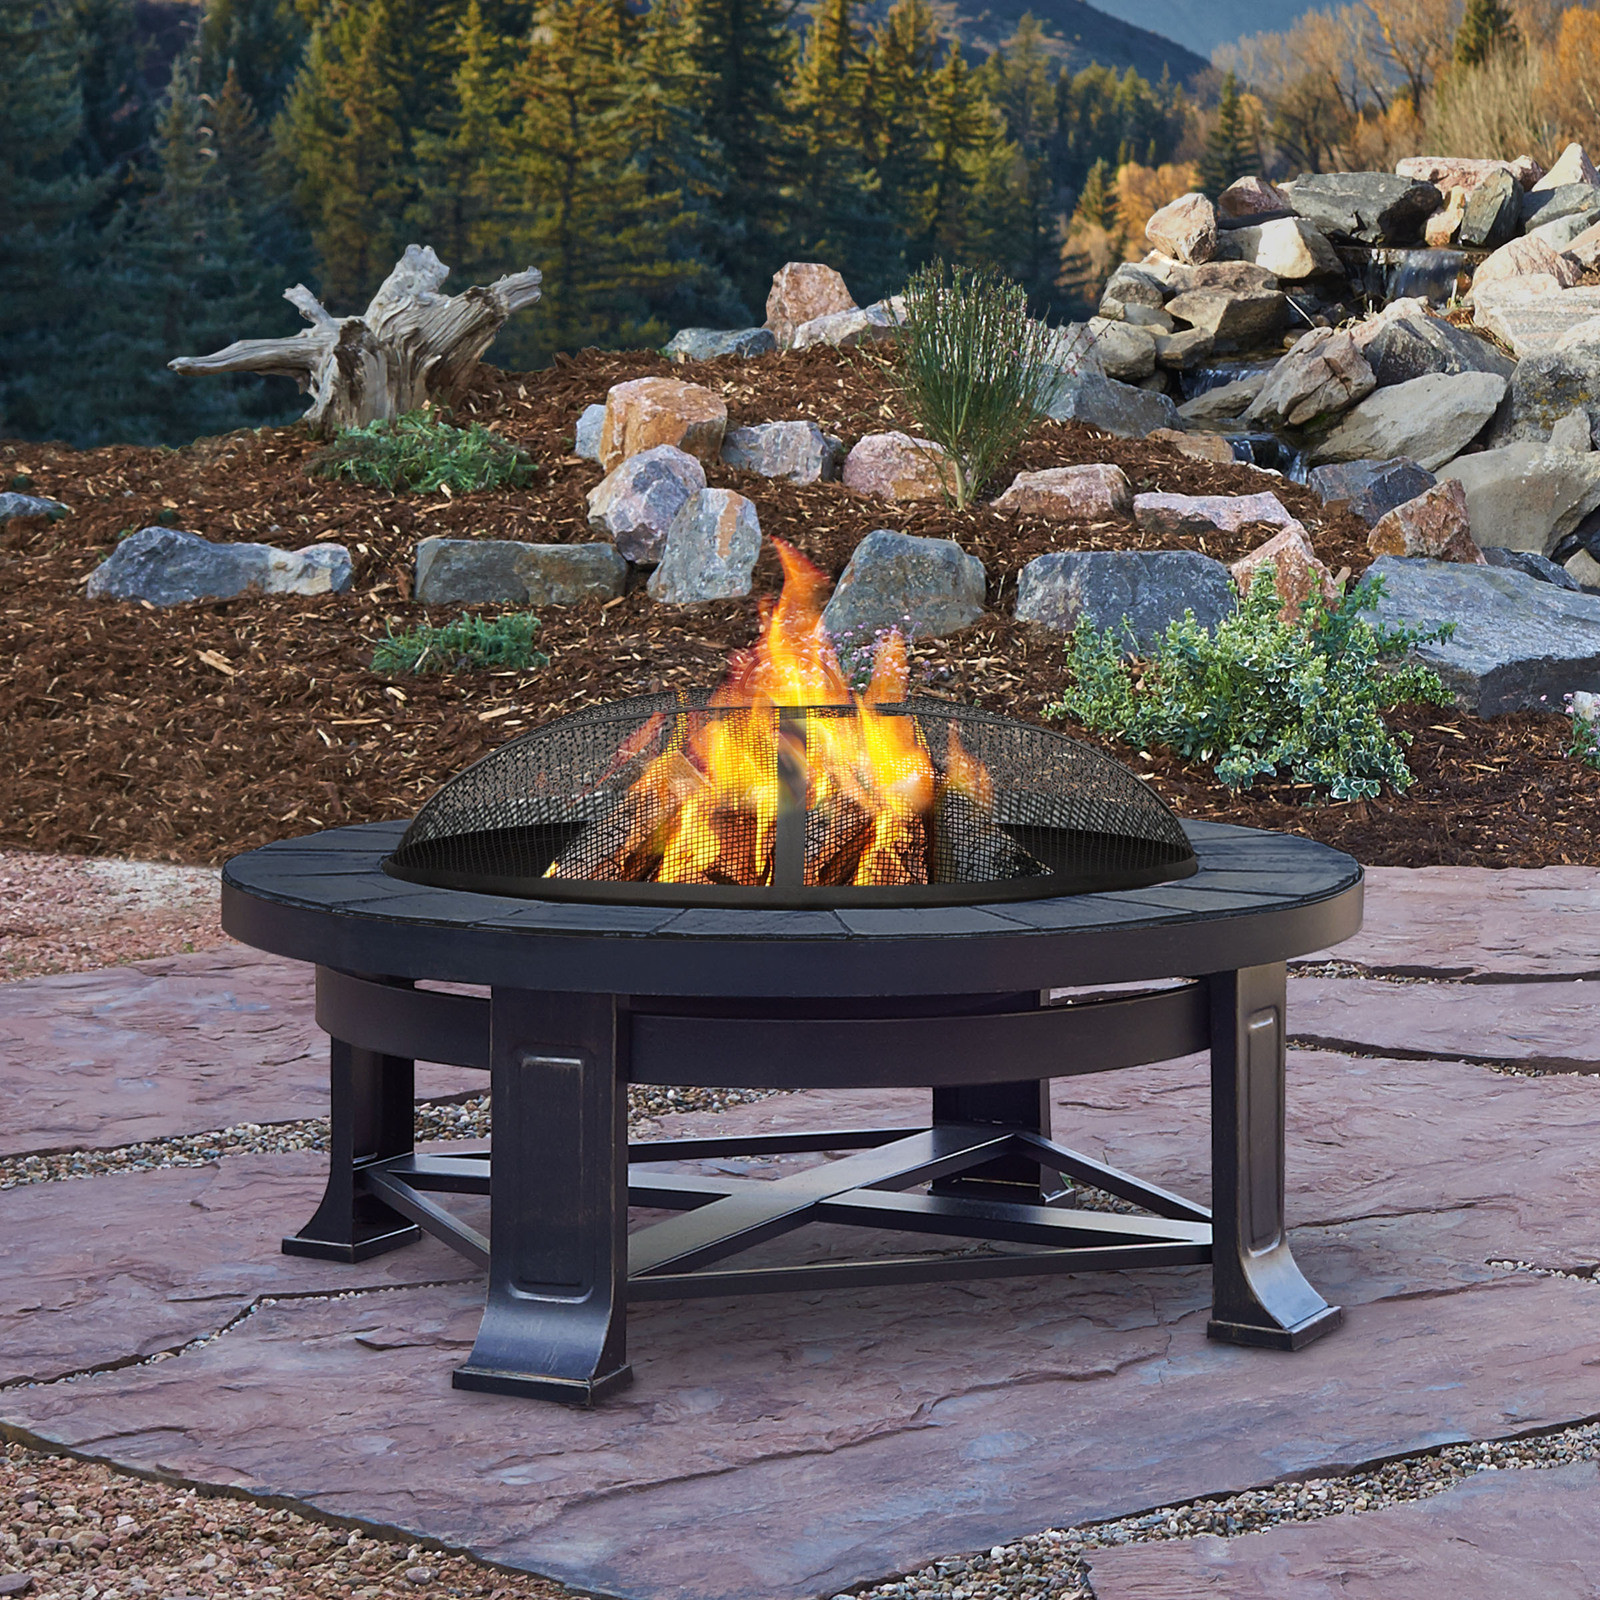 Fire Pit On Wood Deck
 Real Flame Edwards 33 75" Outdoor Patio Deck Wood Burning